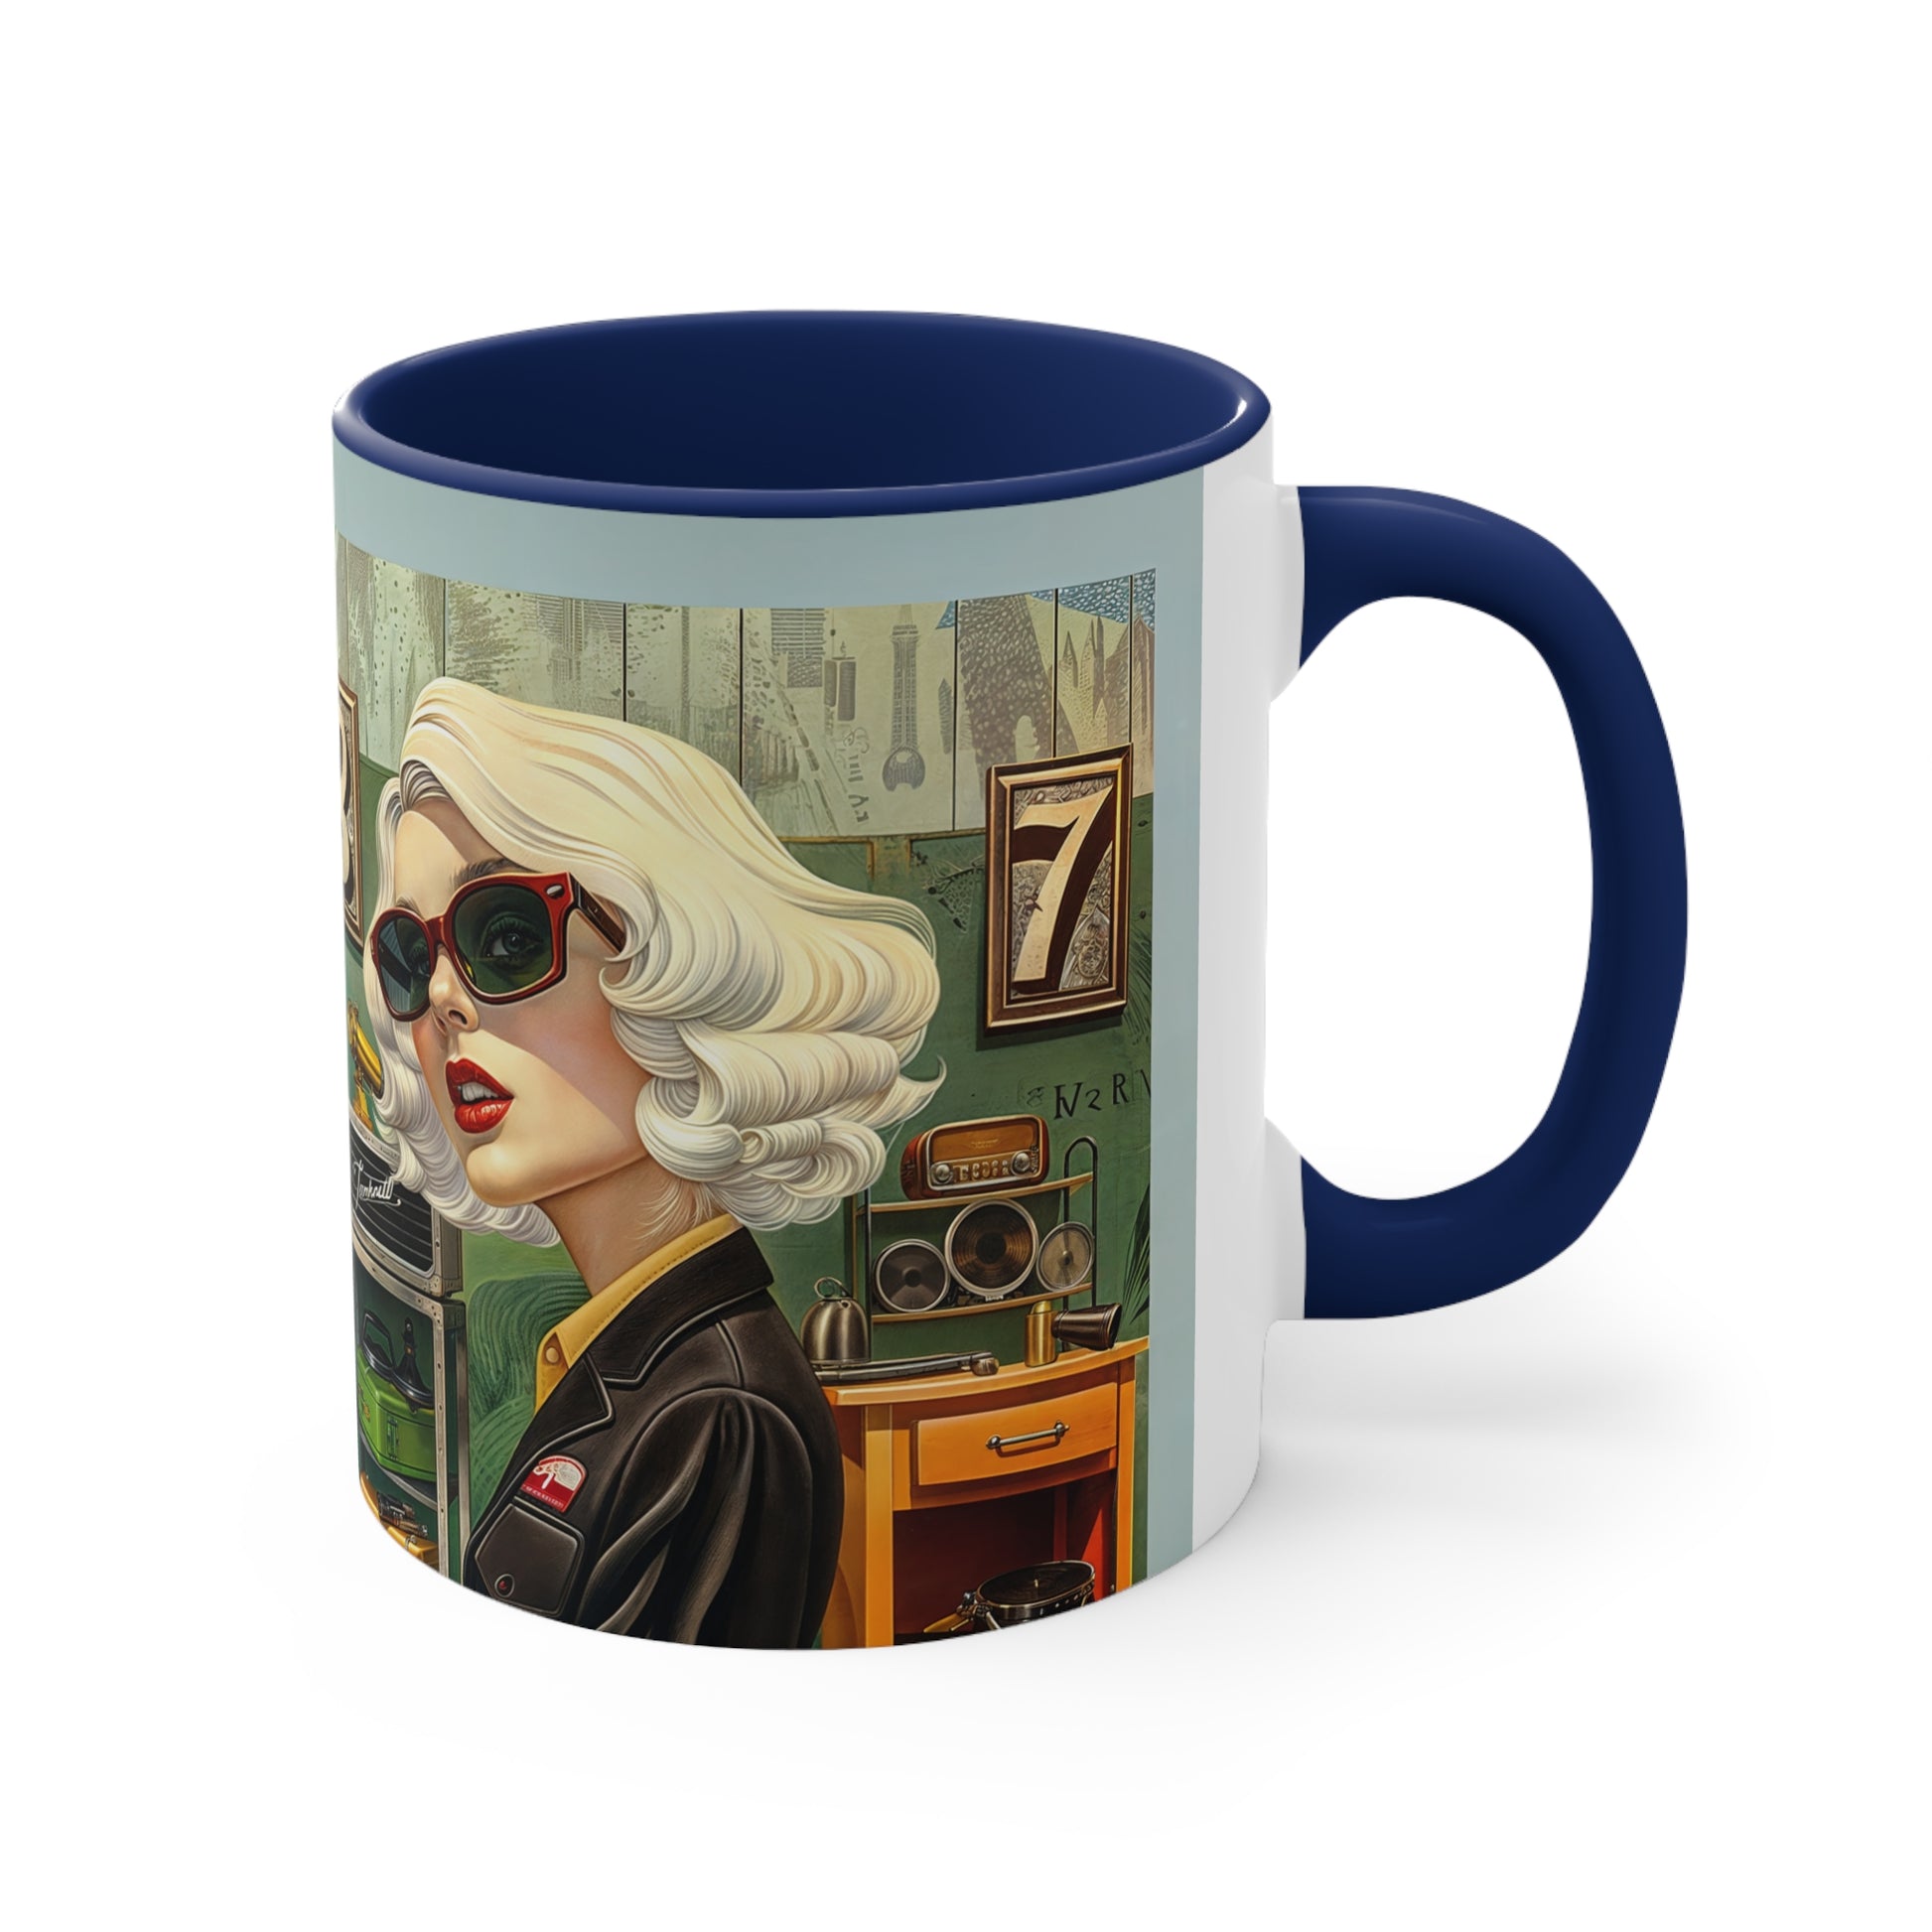 Accent Coffee Mug, 11oz - Tool Time Blonde-side navy